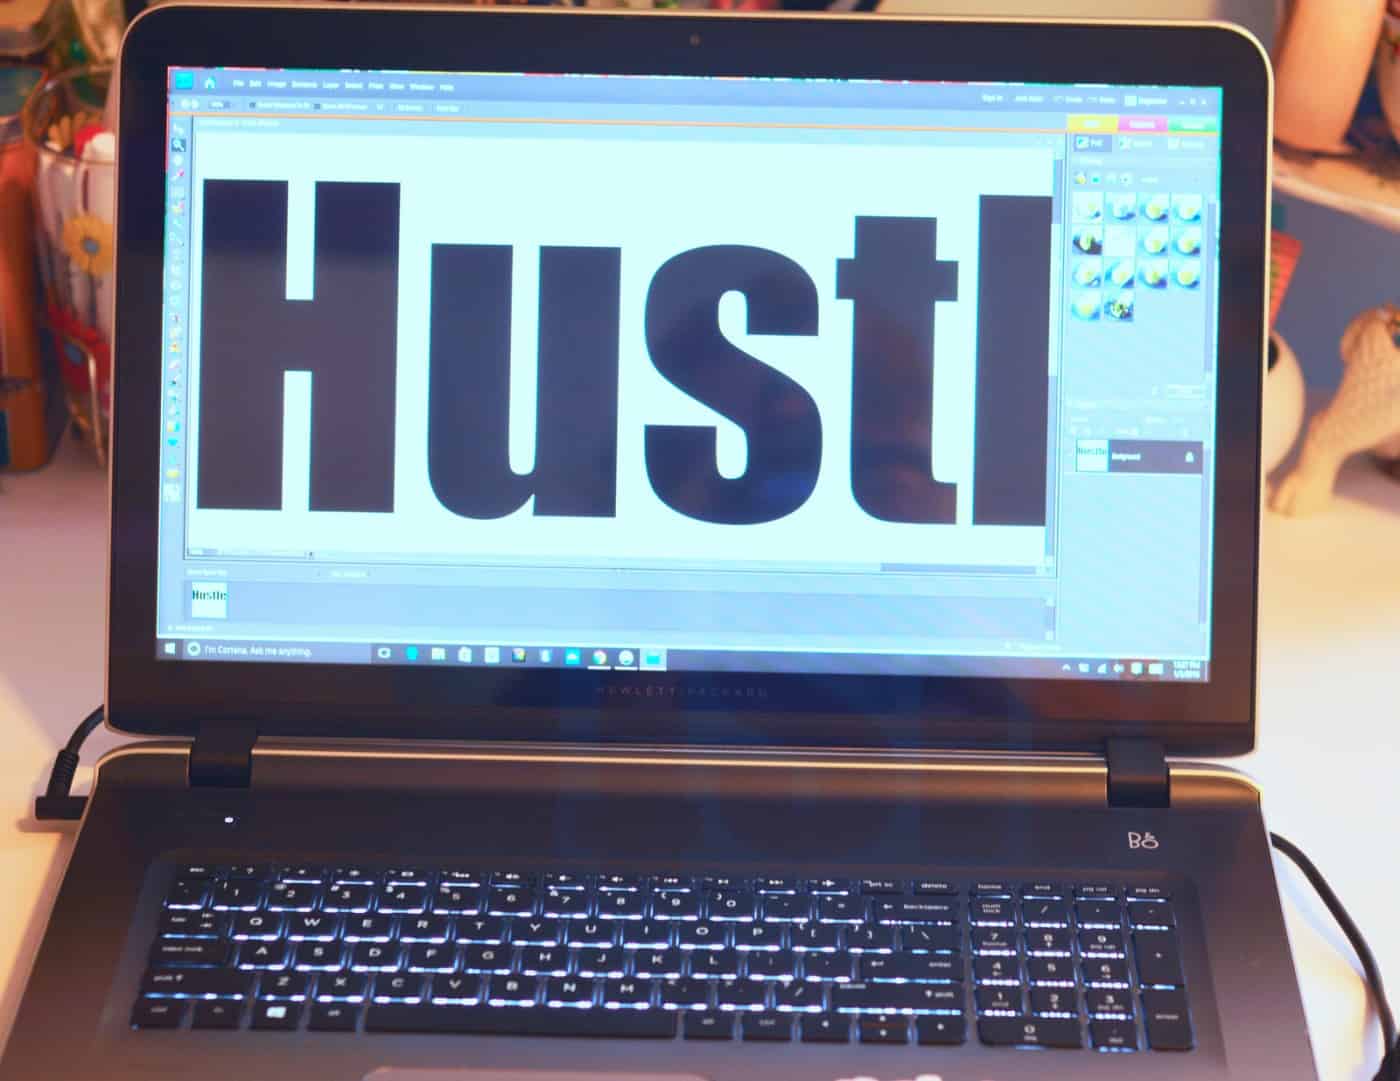 The word hustle on the screen of a laptop computer